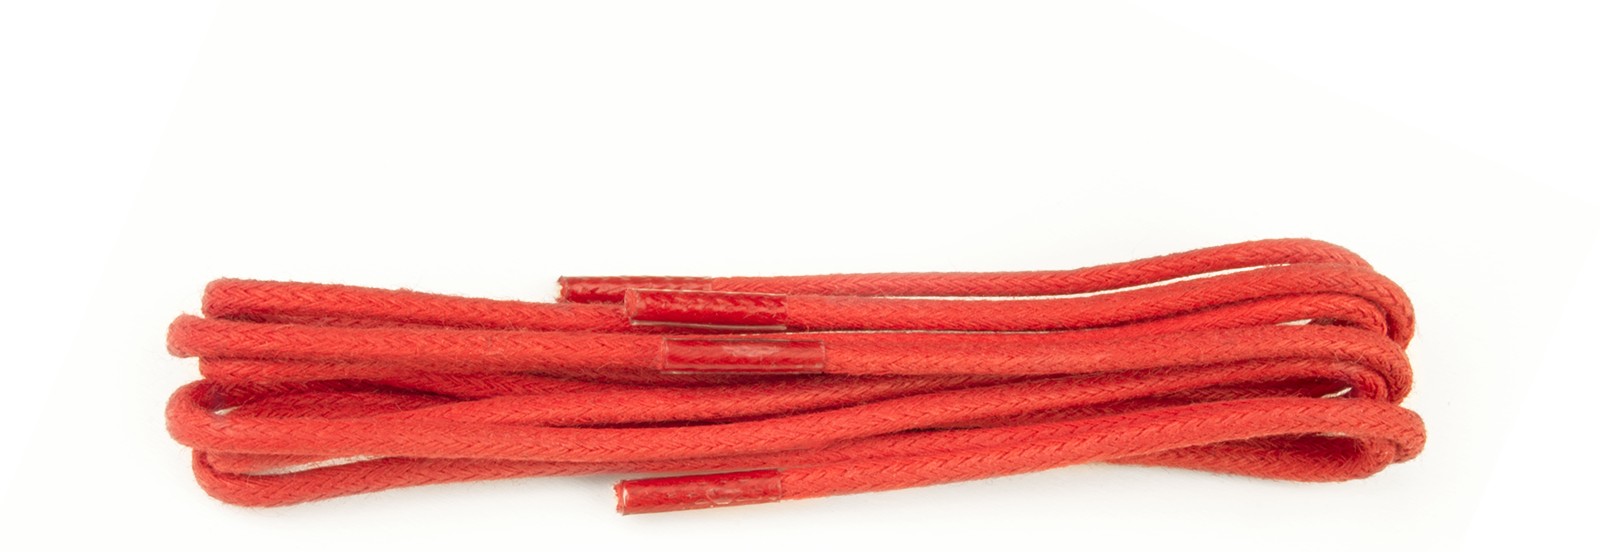 Red Wax Polished Fine 2mm Round Laces